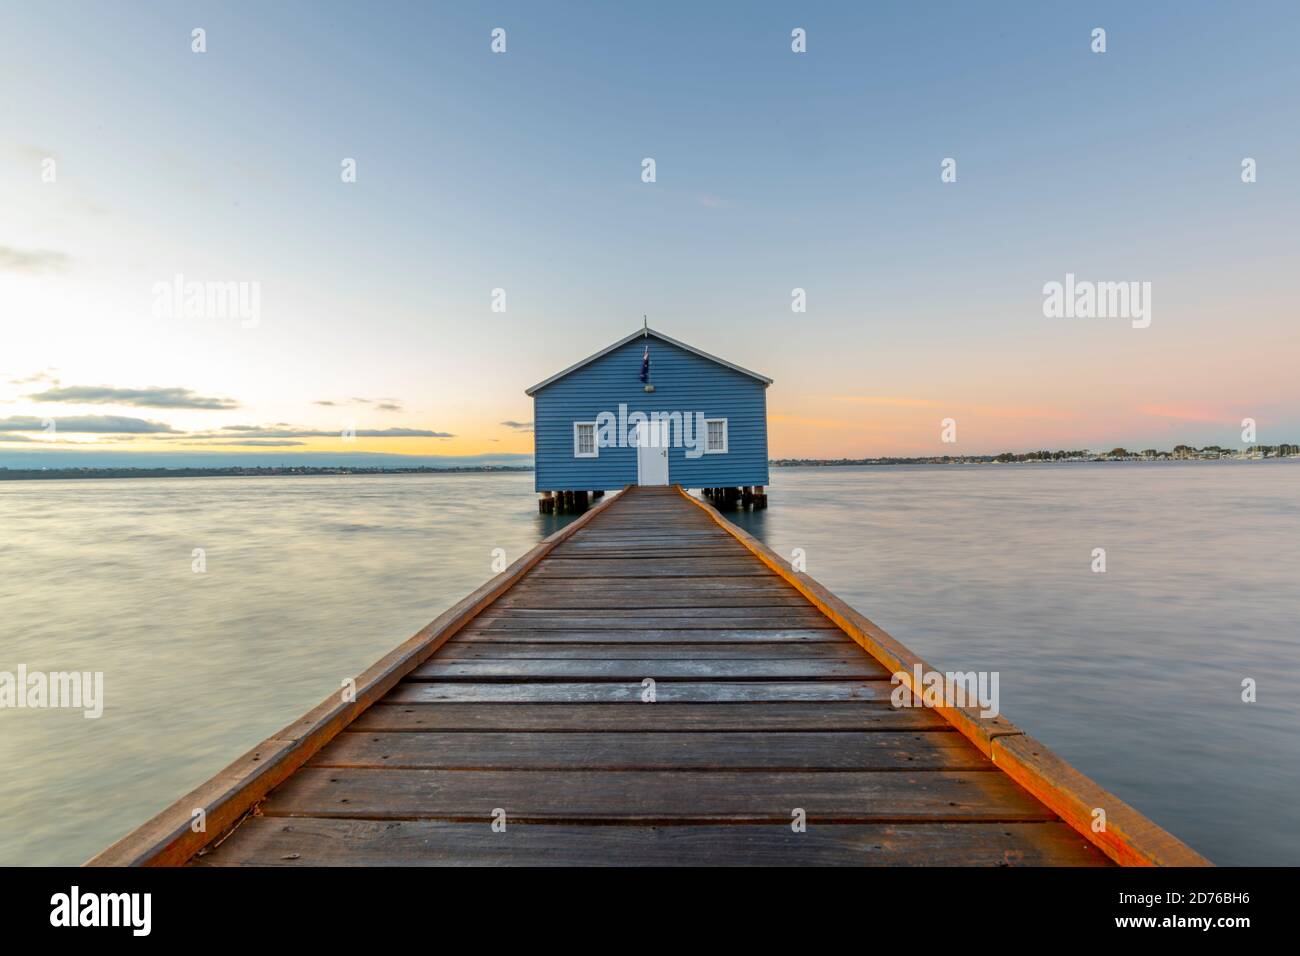 Perth's Blue Boat Shed bei Sonnenaufgang. Stockfoto